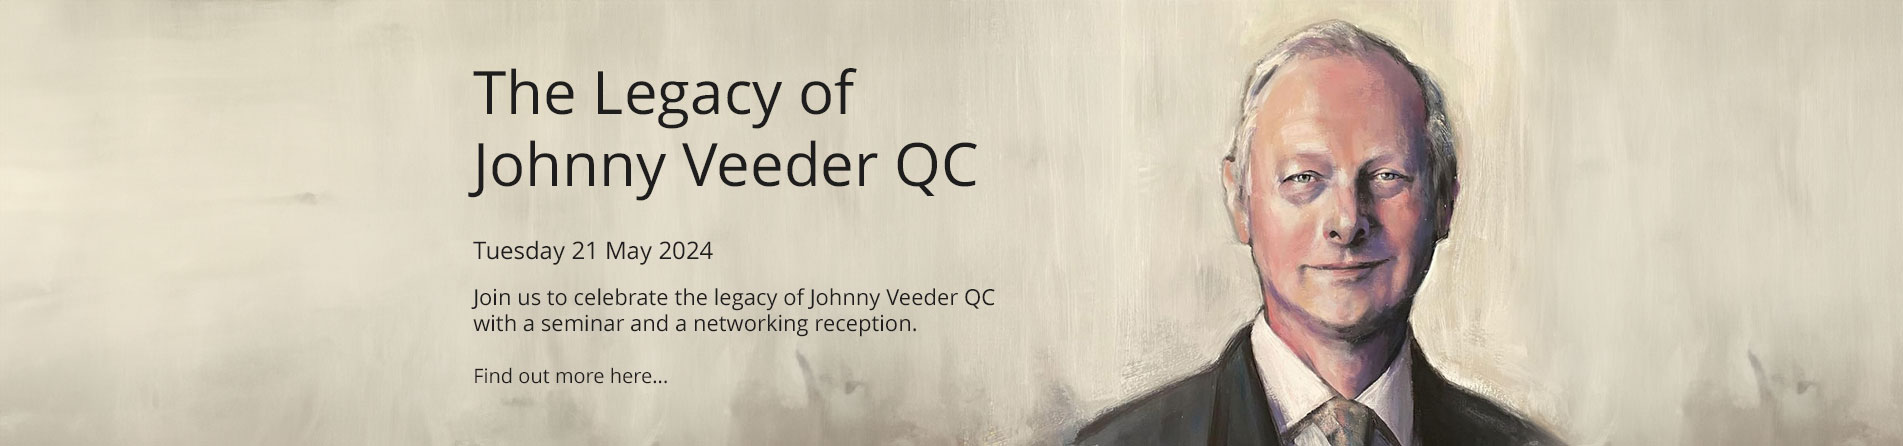 The Legacy of Johnny Veeder QC - Tuesday 21 May 2024